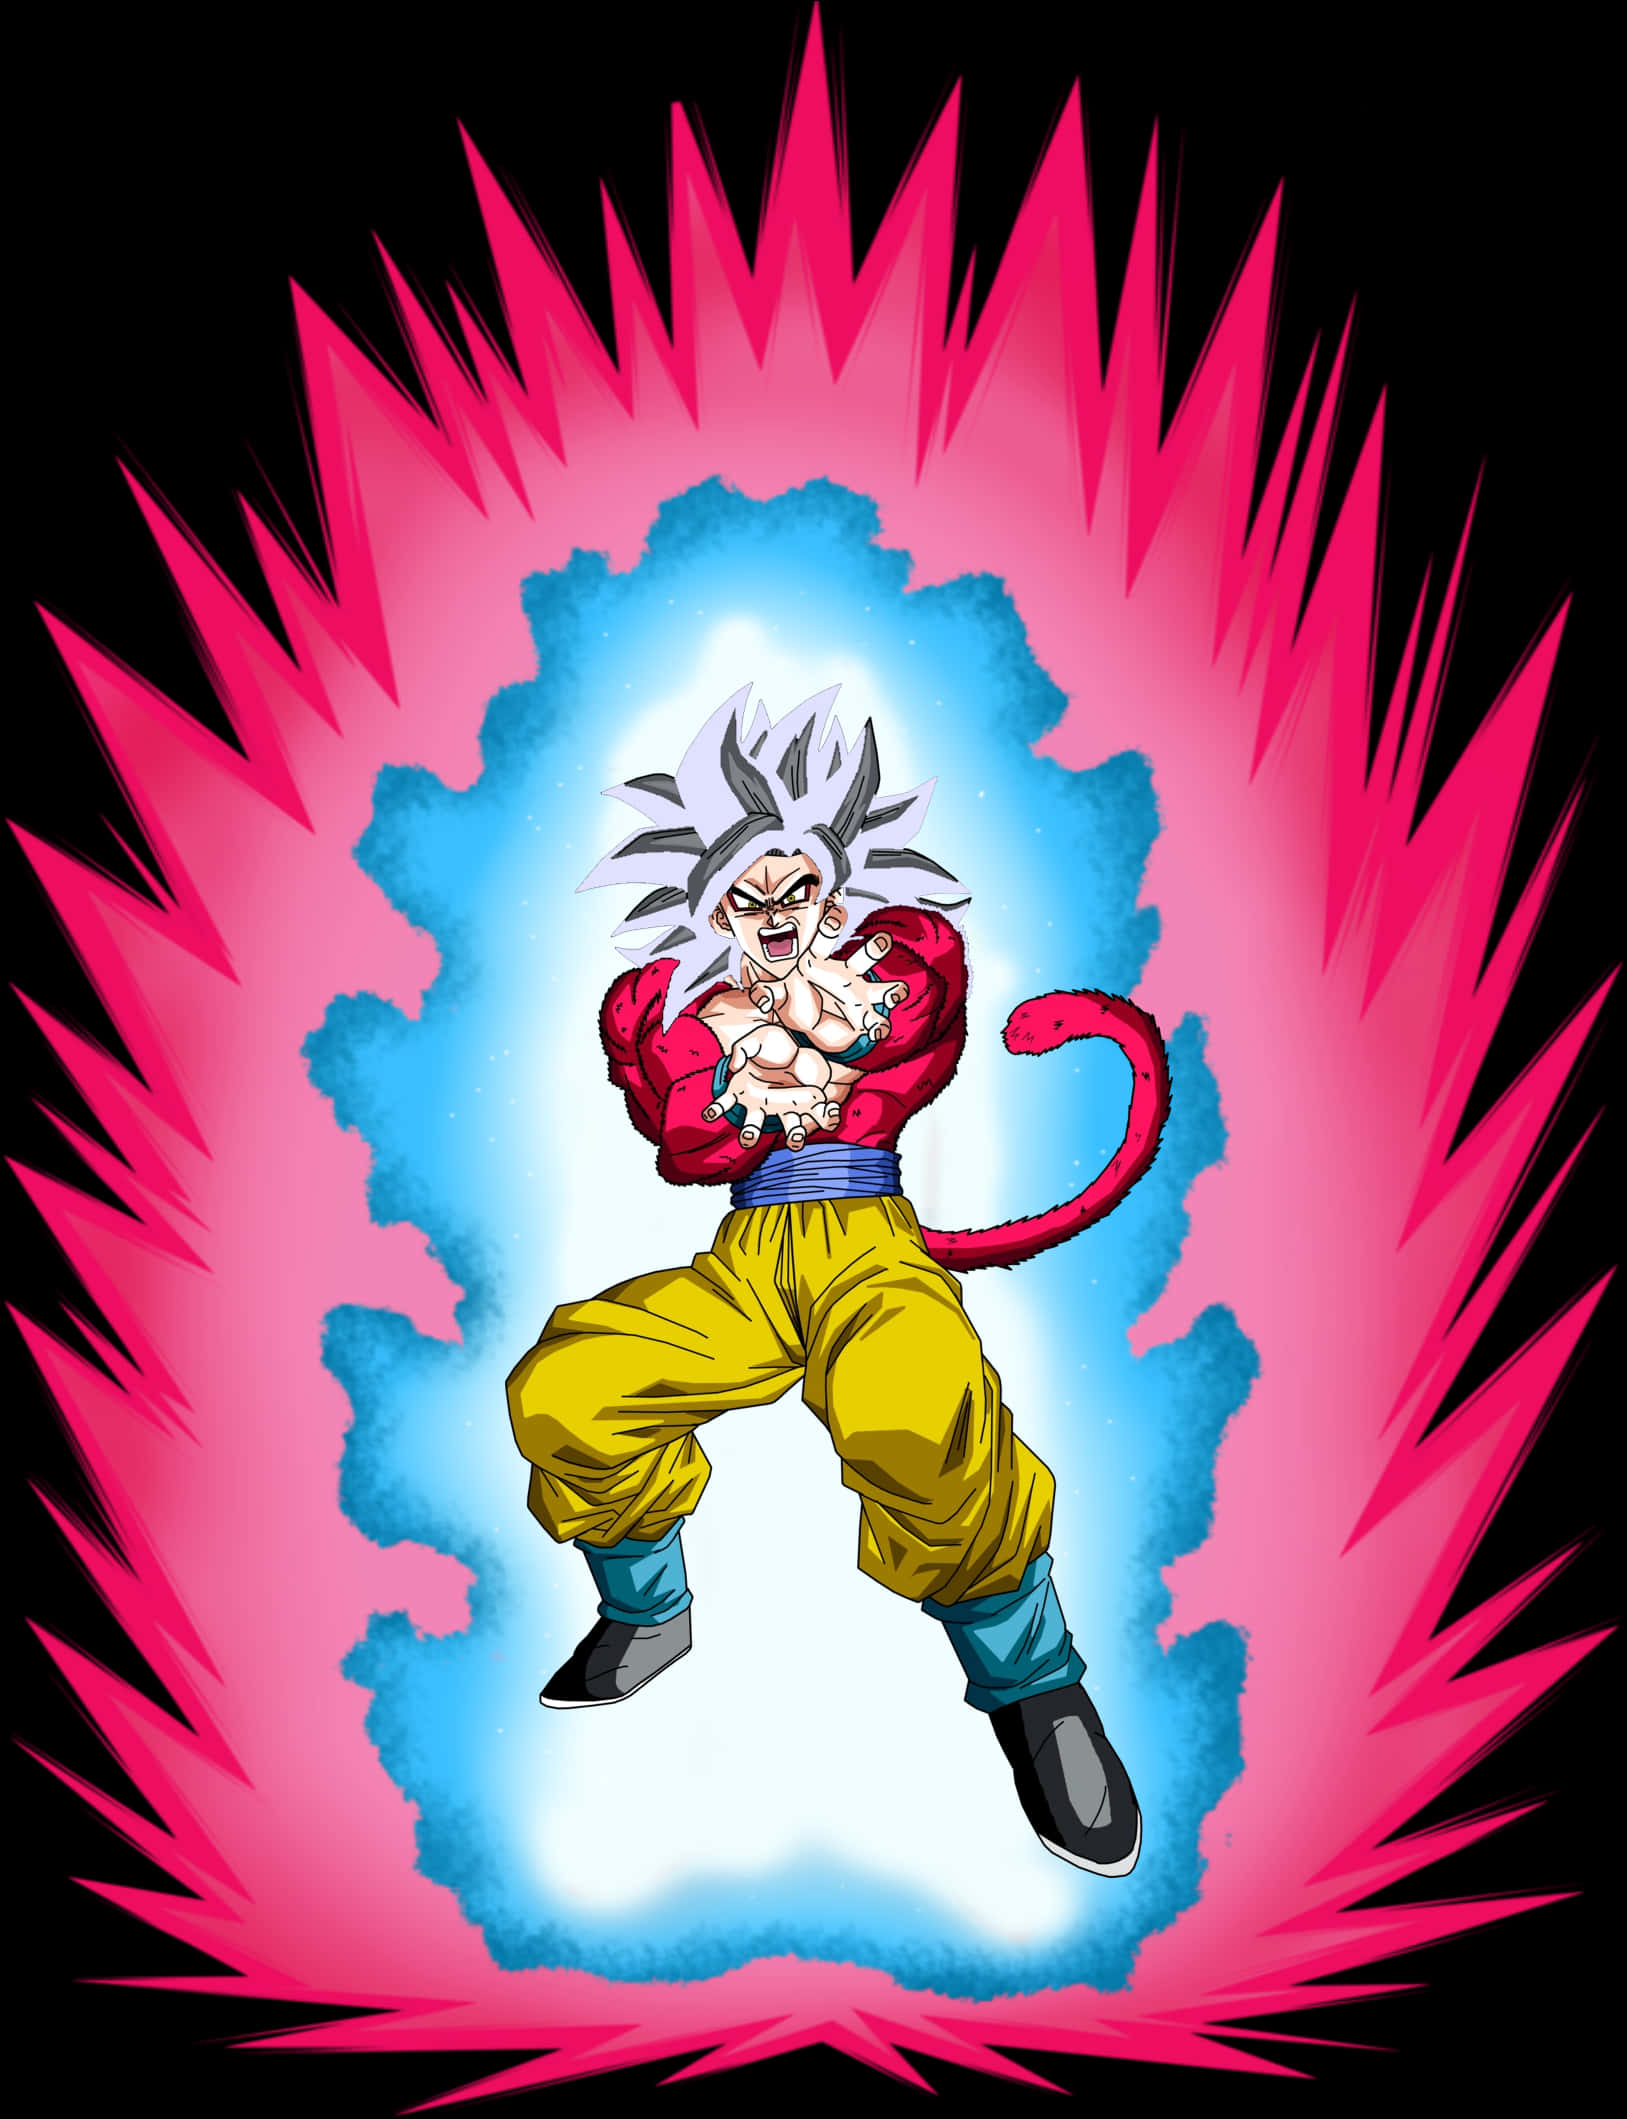 A Cartoon Of A Man With A Tail And A Pink Explosion